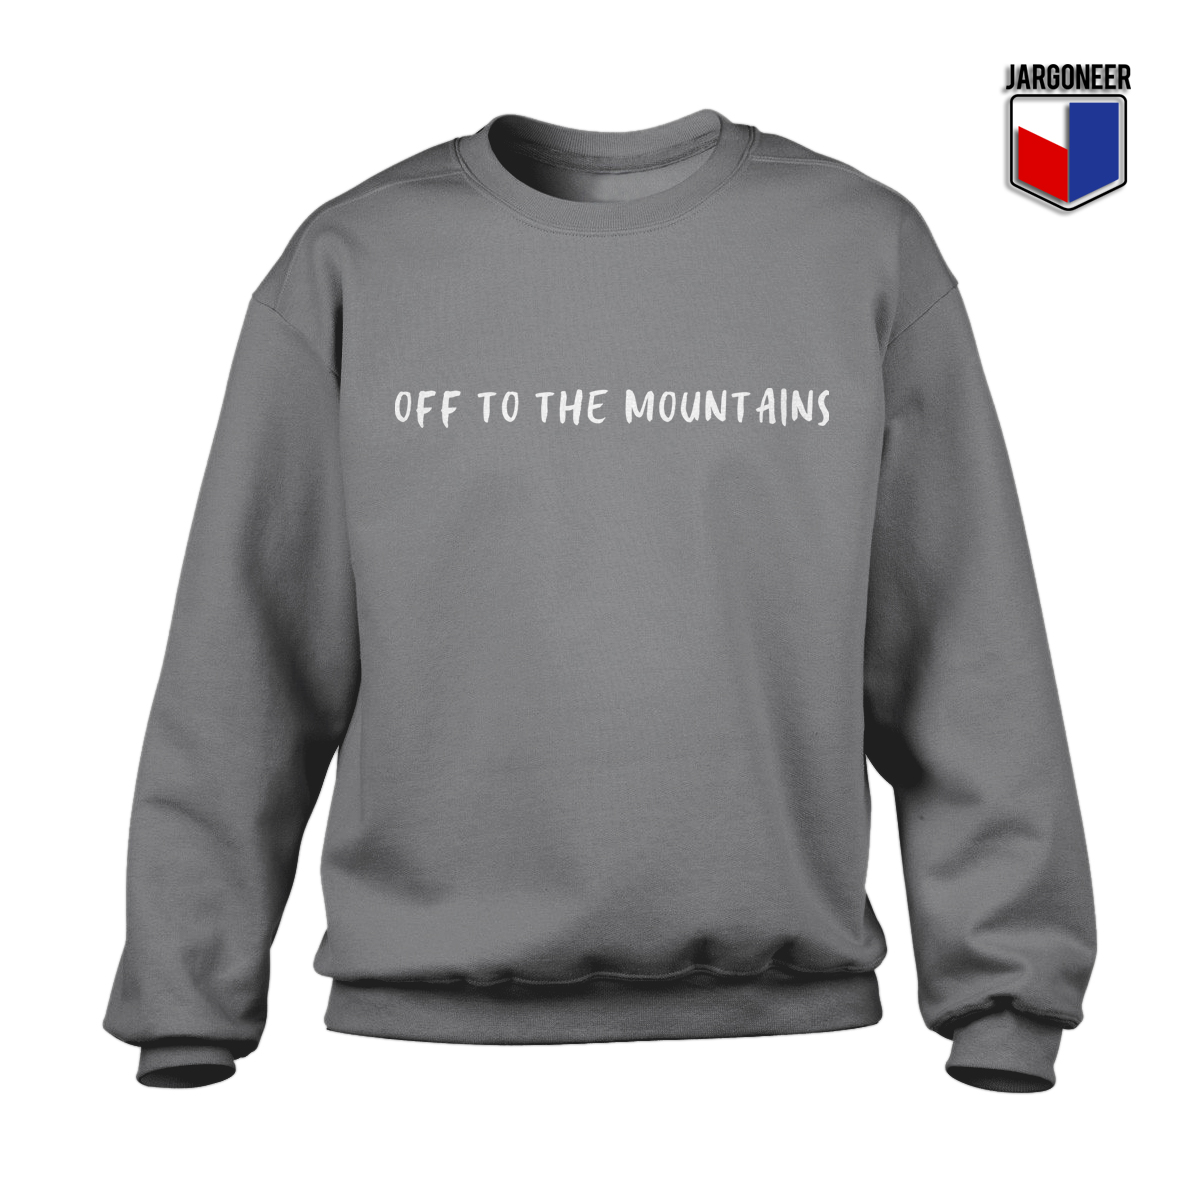 Off To The Mountains Grey Sweatshirt - Shop Unique Graphic Cool Shirt Designs